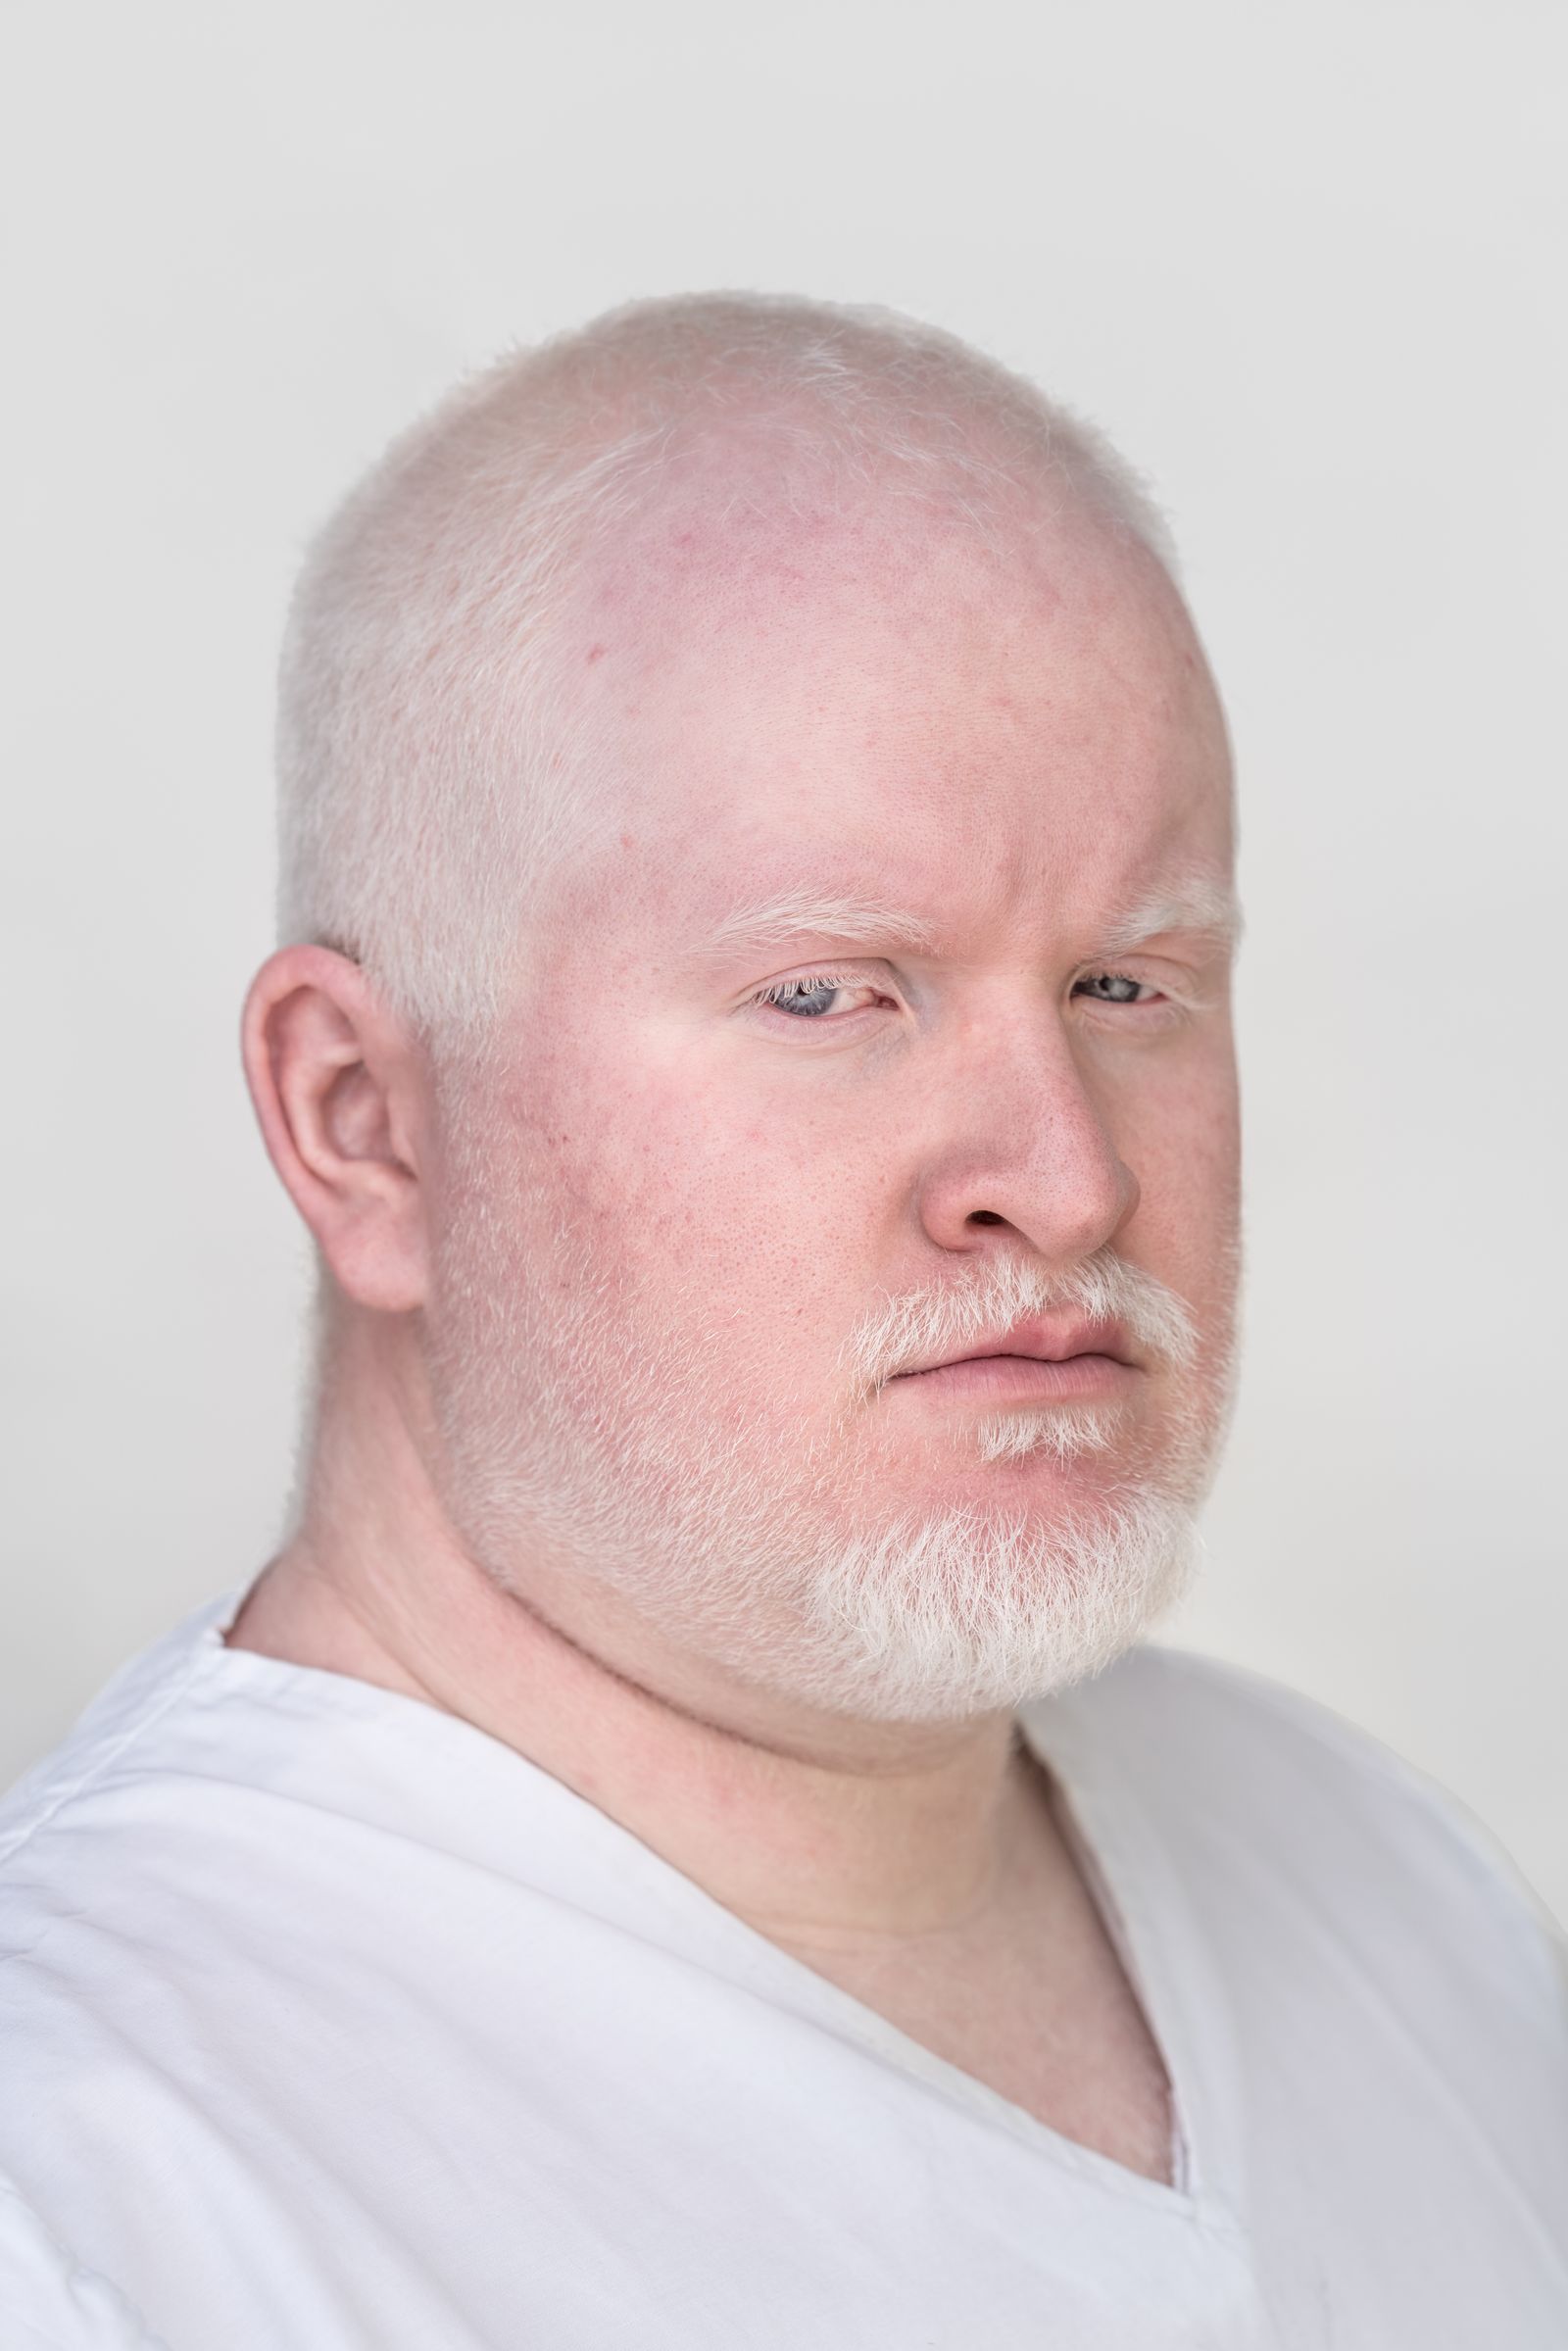 © Jorge Monaco - Image from the ALBINOS, BEING DIFFERENT photography project